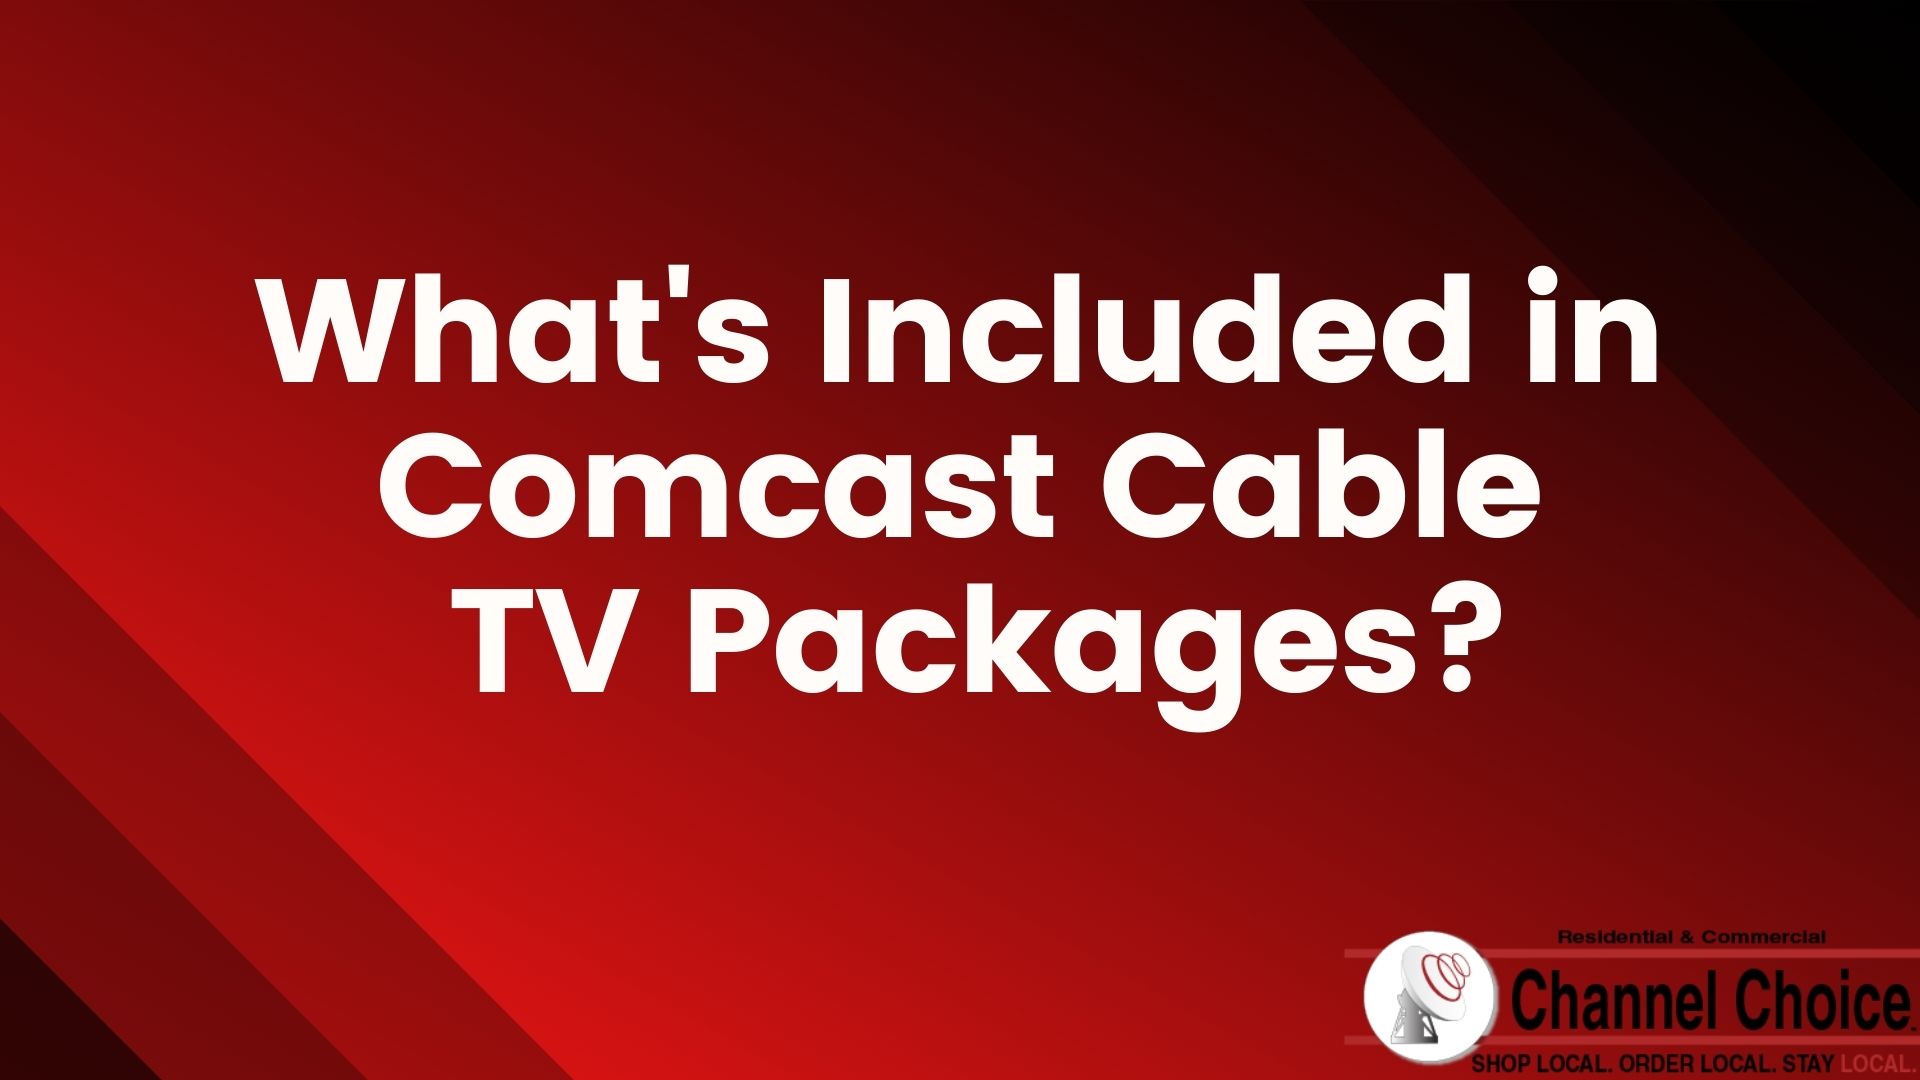 xfinity internet packages